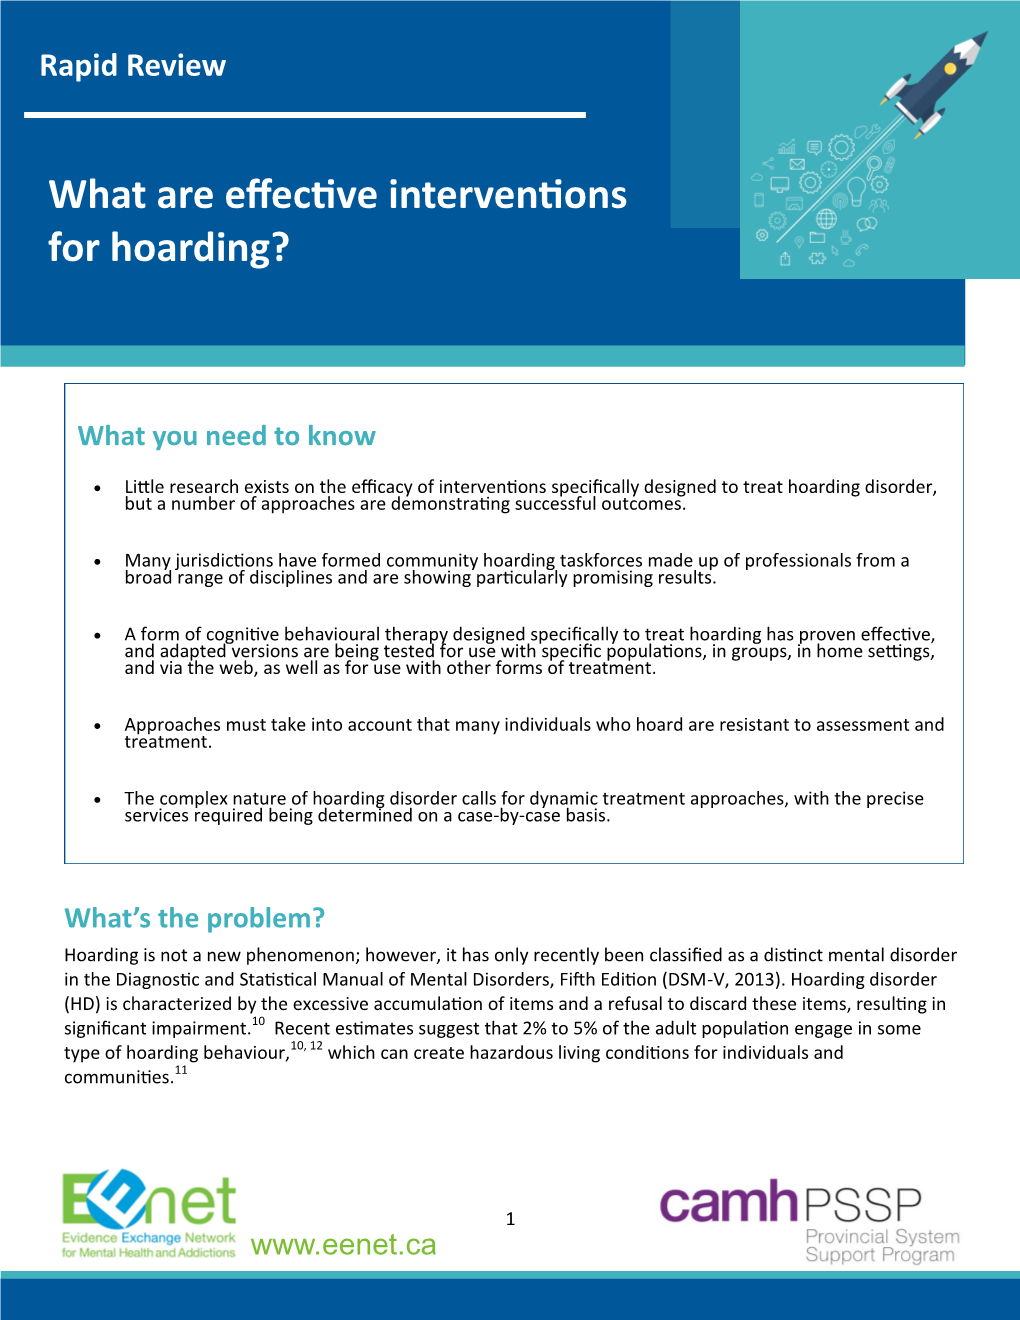 What Are Effective Interventions for Hoarding?